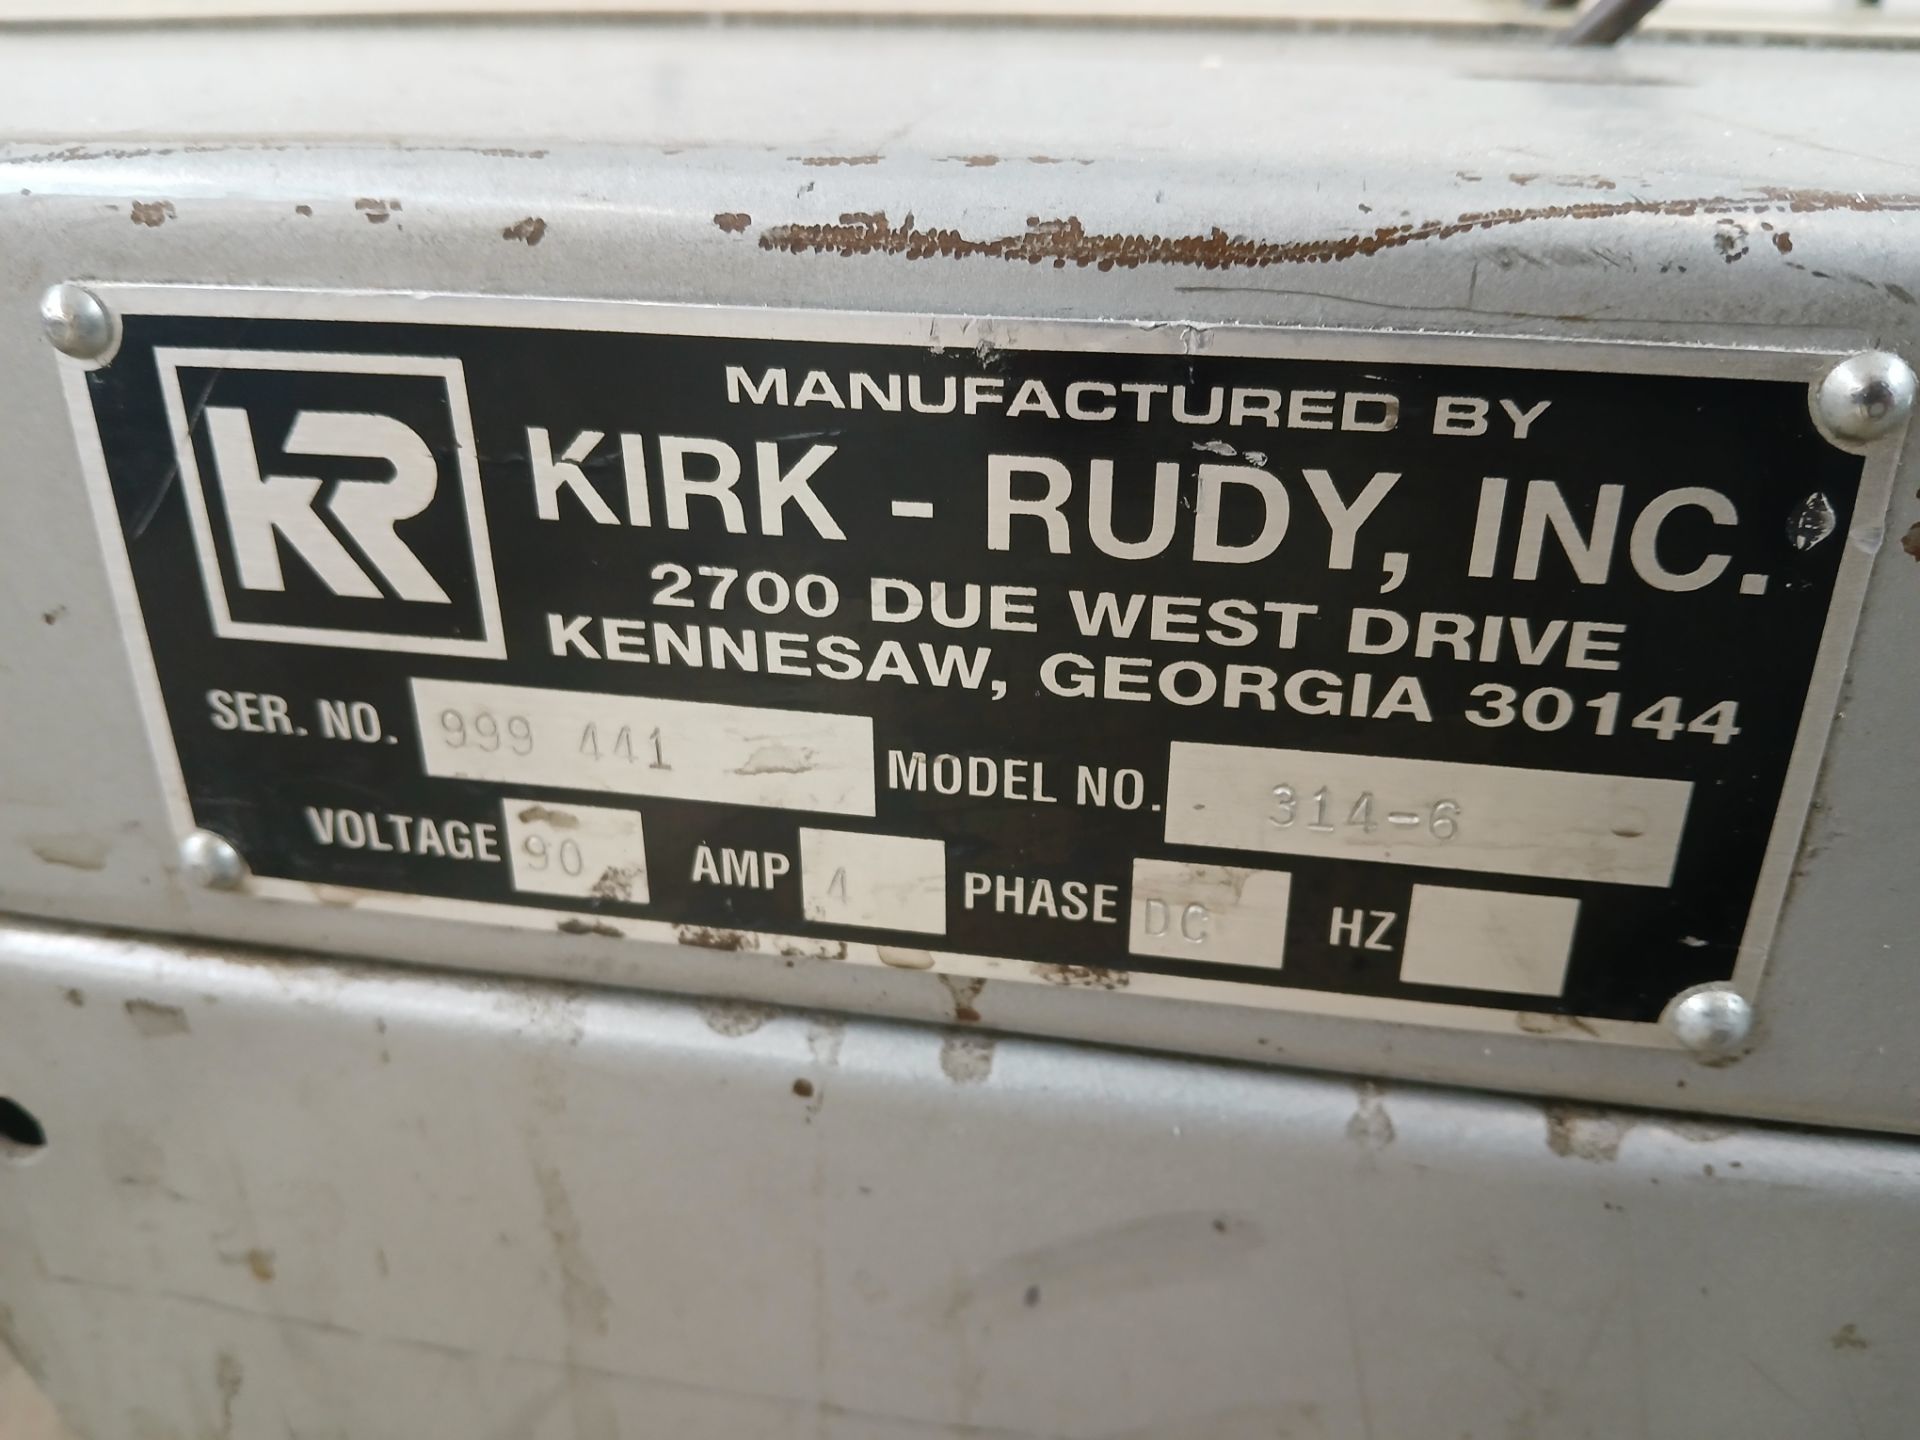 Kirk-Rudy 215V throughfeed jetmail system, Serial Number 9995176 with Dell Dimension 9150 PC control - Bild 9 aus 9